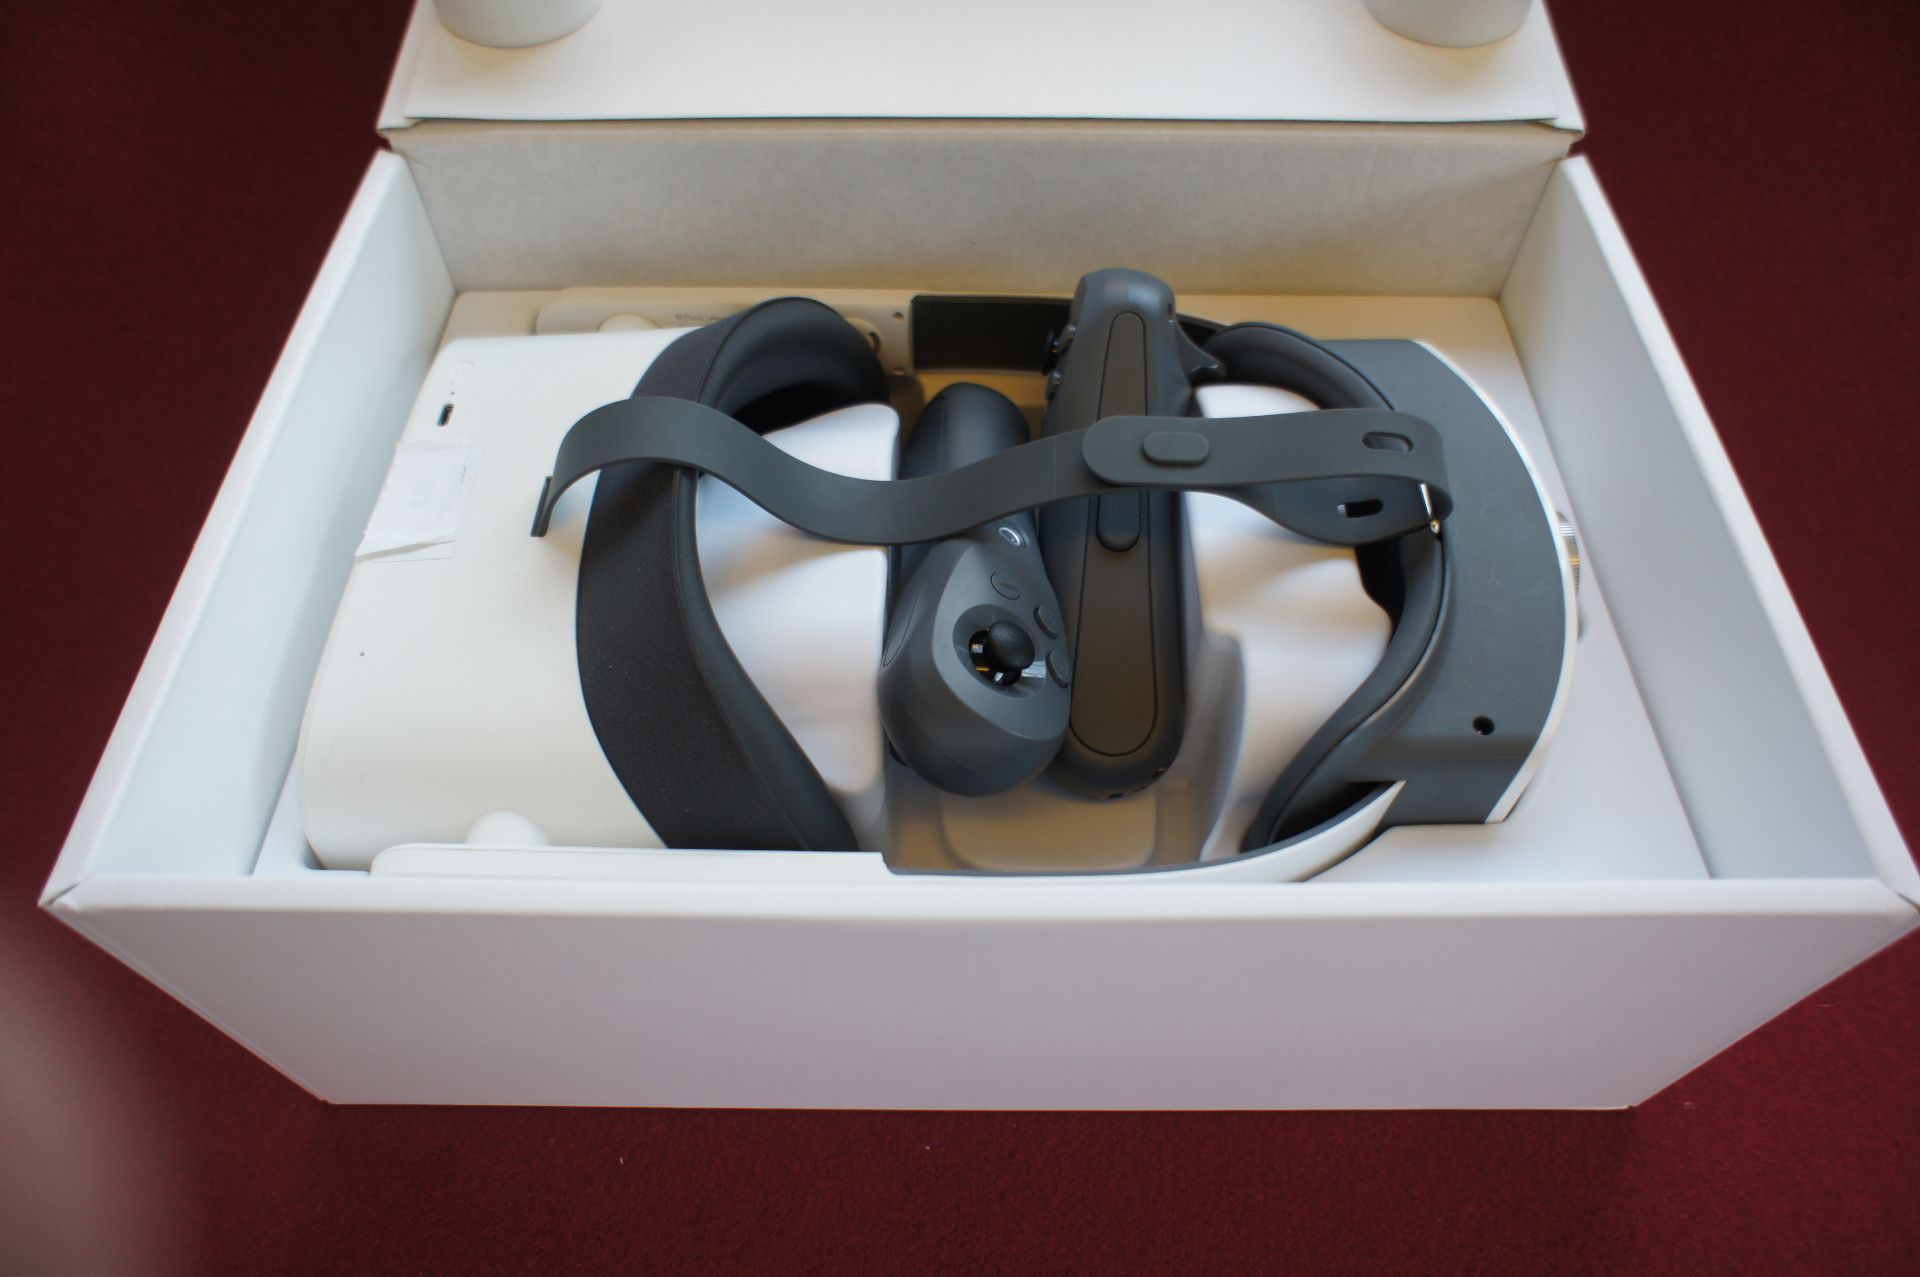 Pico Neo 2 VR headset, Asset Number B3, S/N PA7B50 - Image 3 of 3